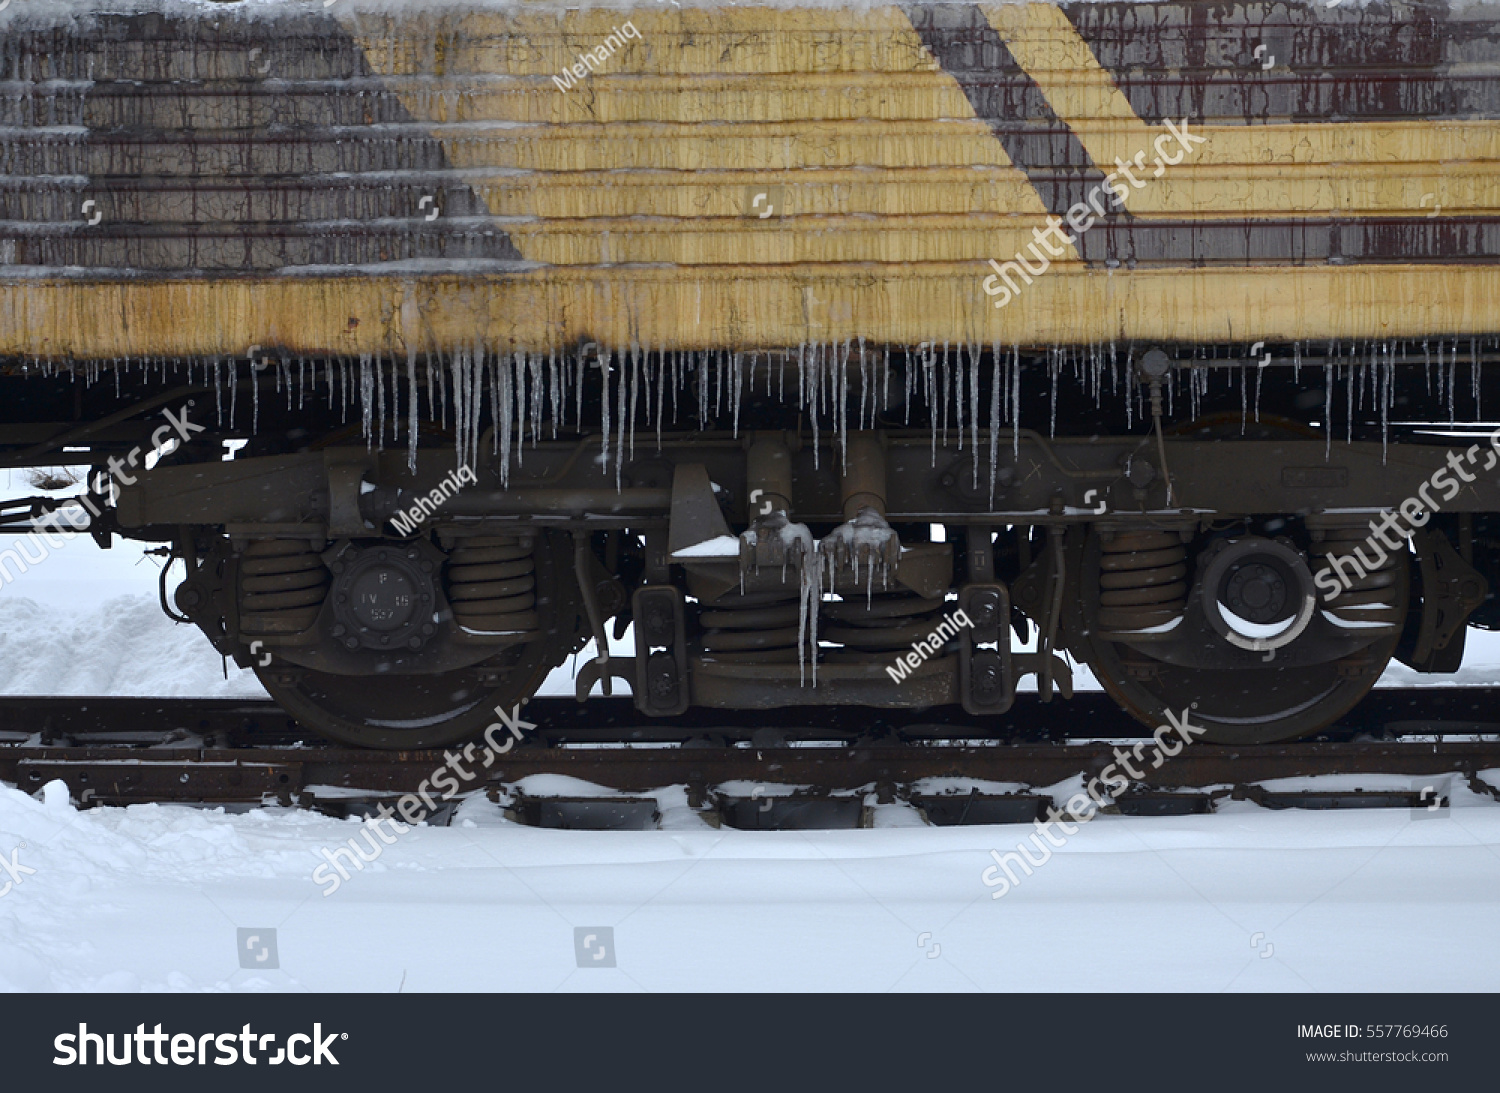 Detailed photo of a frozen car passenger train with icicles and ice on its surface. Railway in the cold winter season #557769466